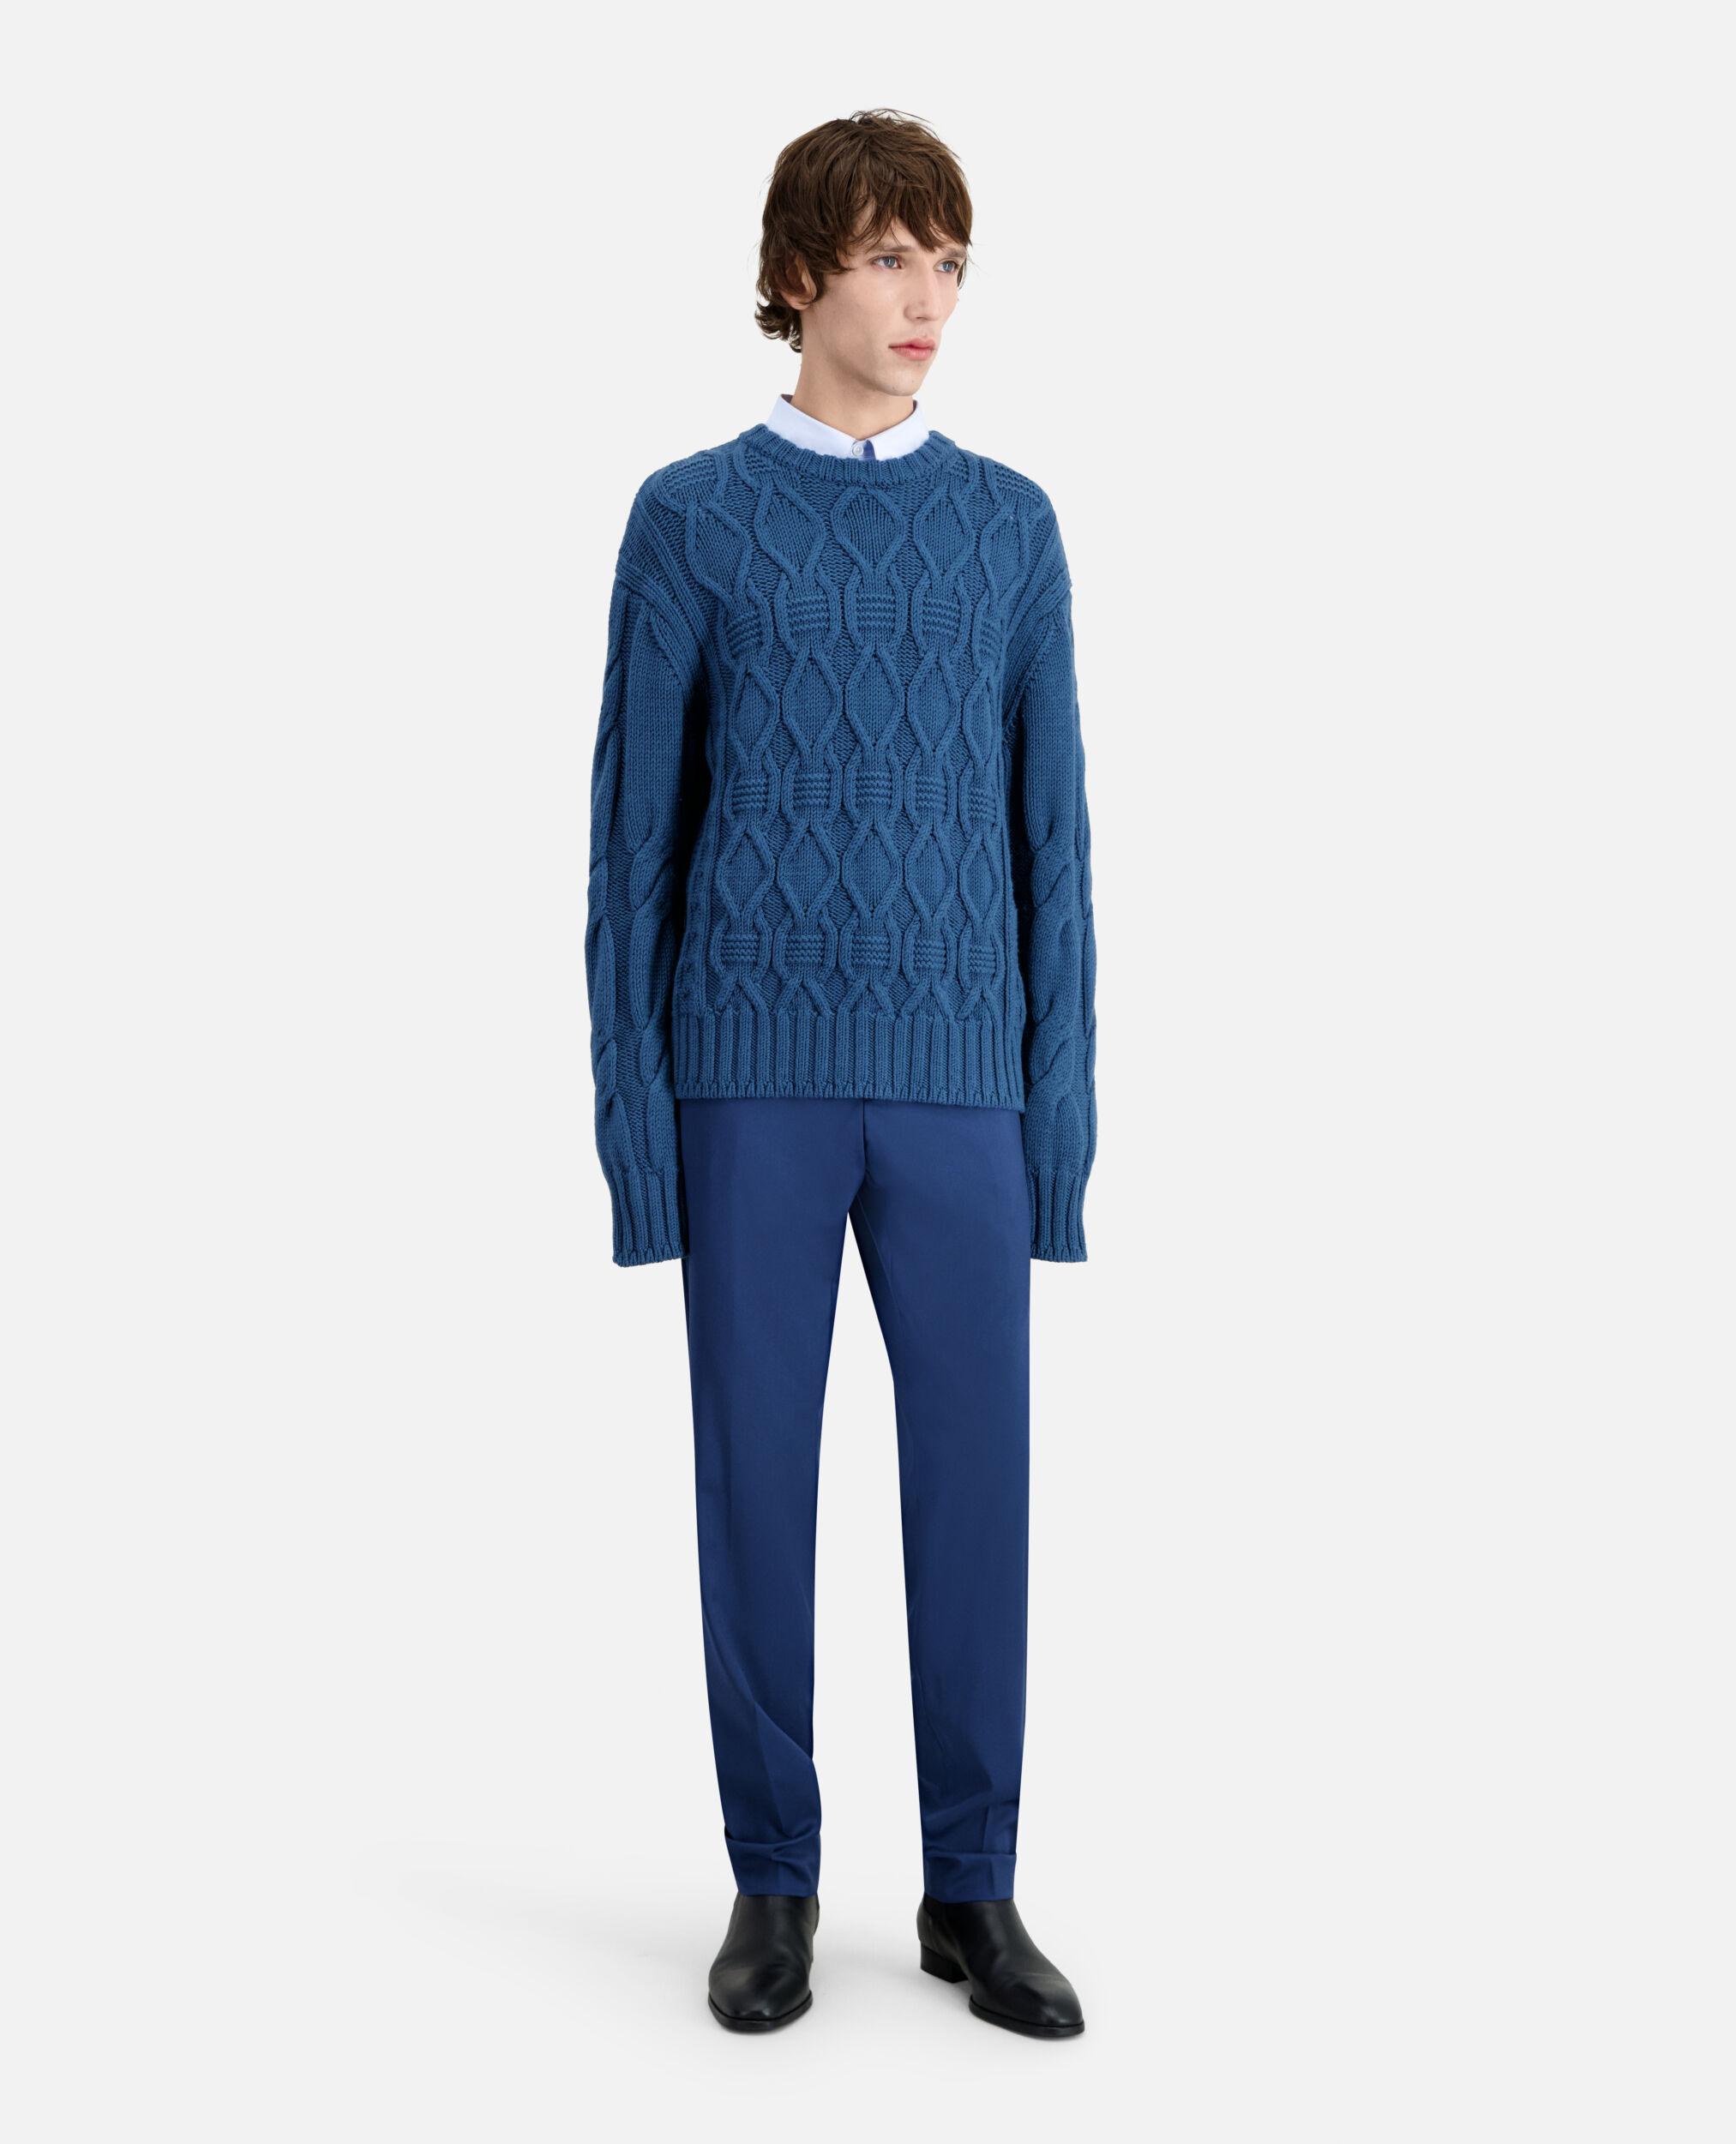 Blauer Pullover aus Wolle mit Zopfmuster, BLUE PETROL, hi-res image number null